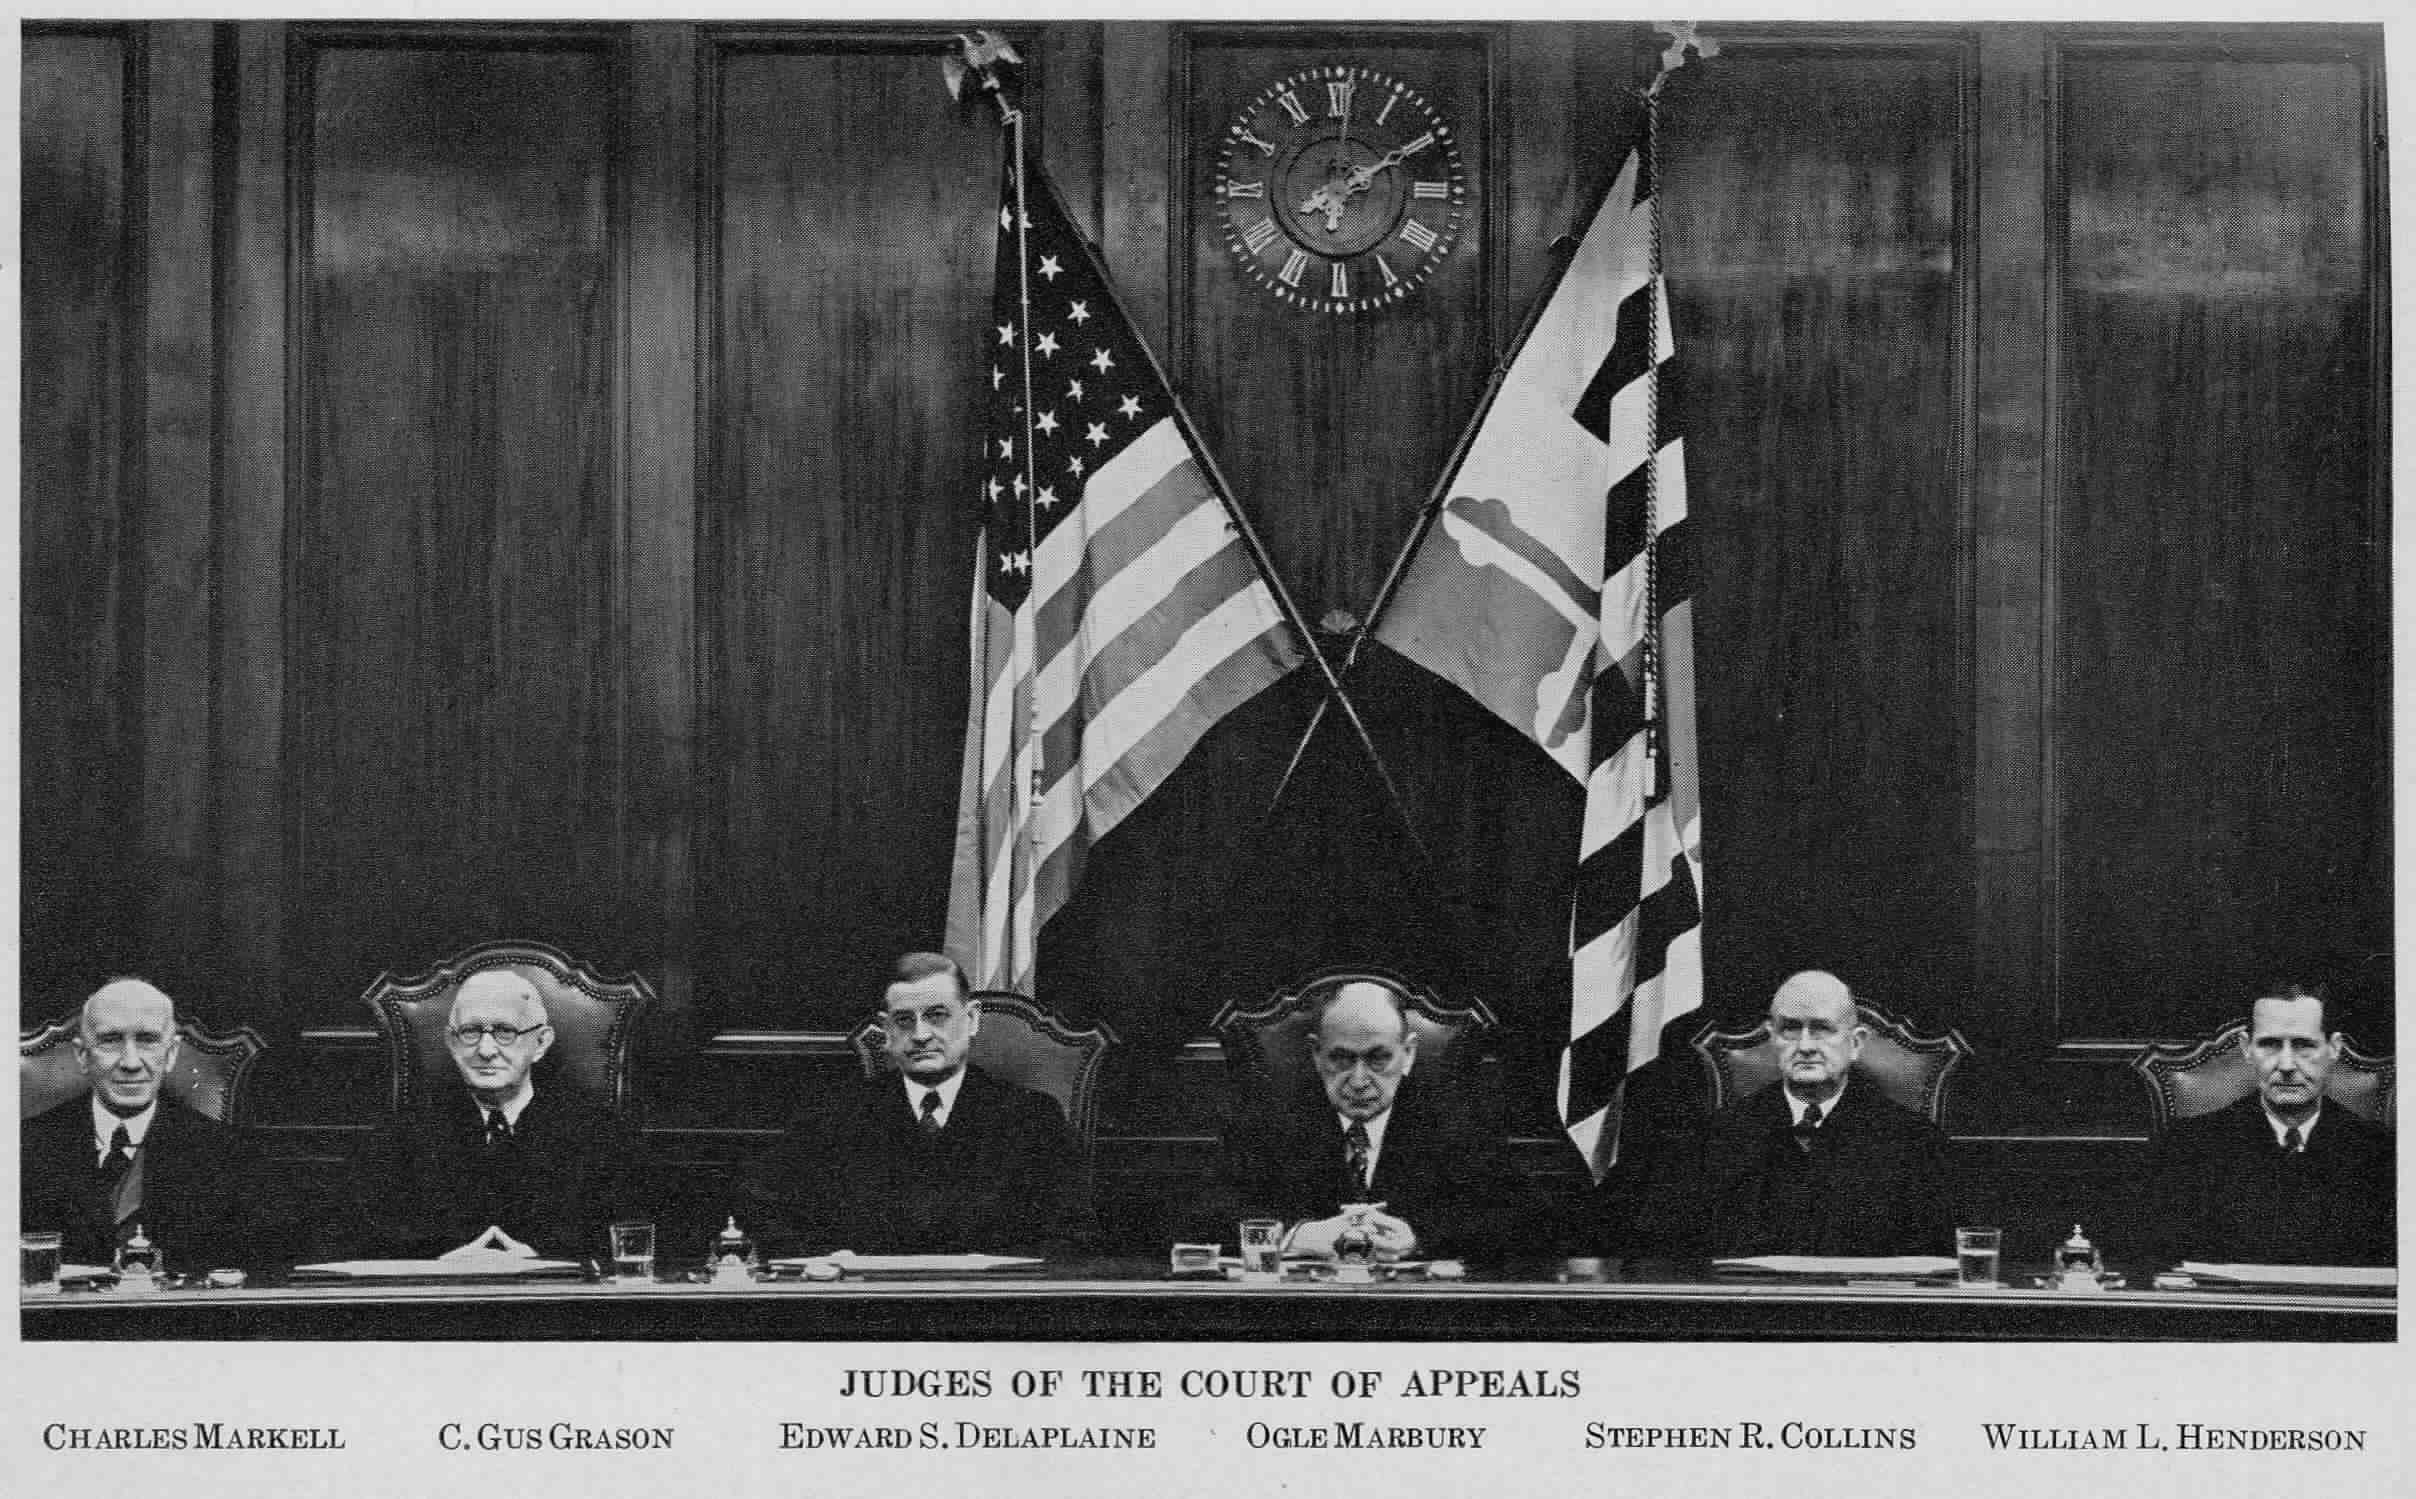 Judges of the Court of Appeals, 1951